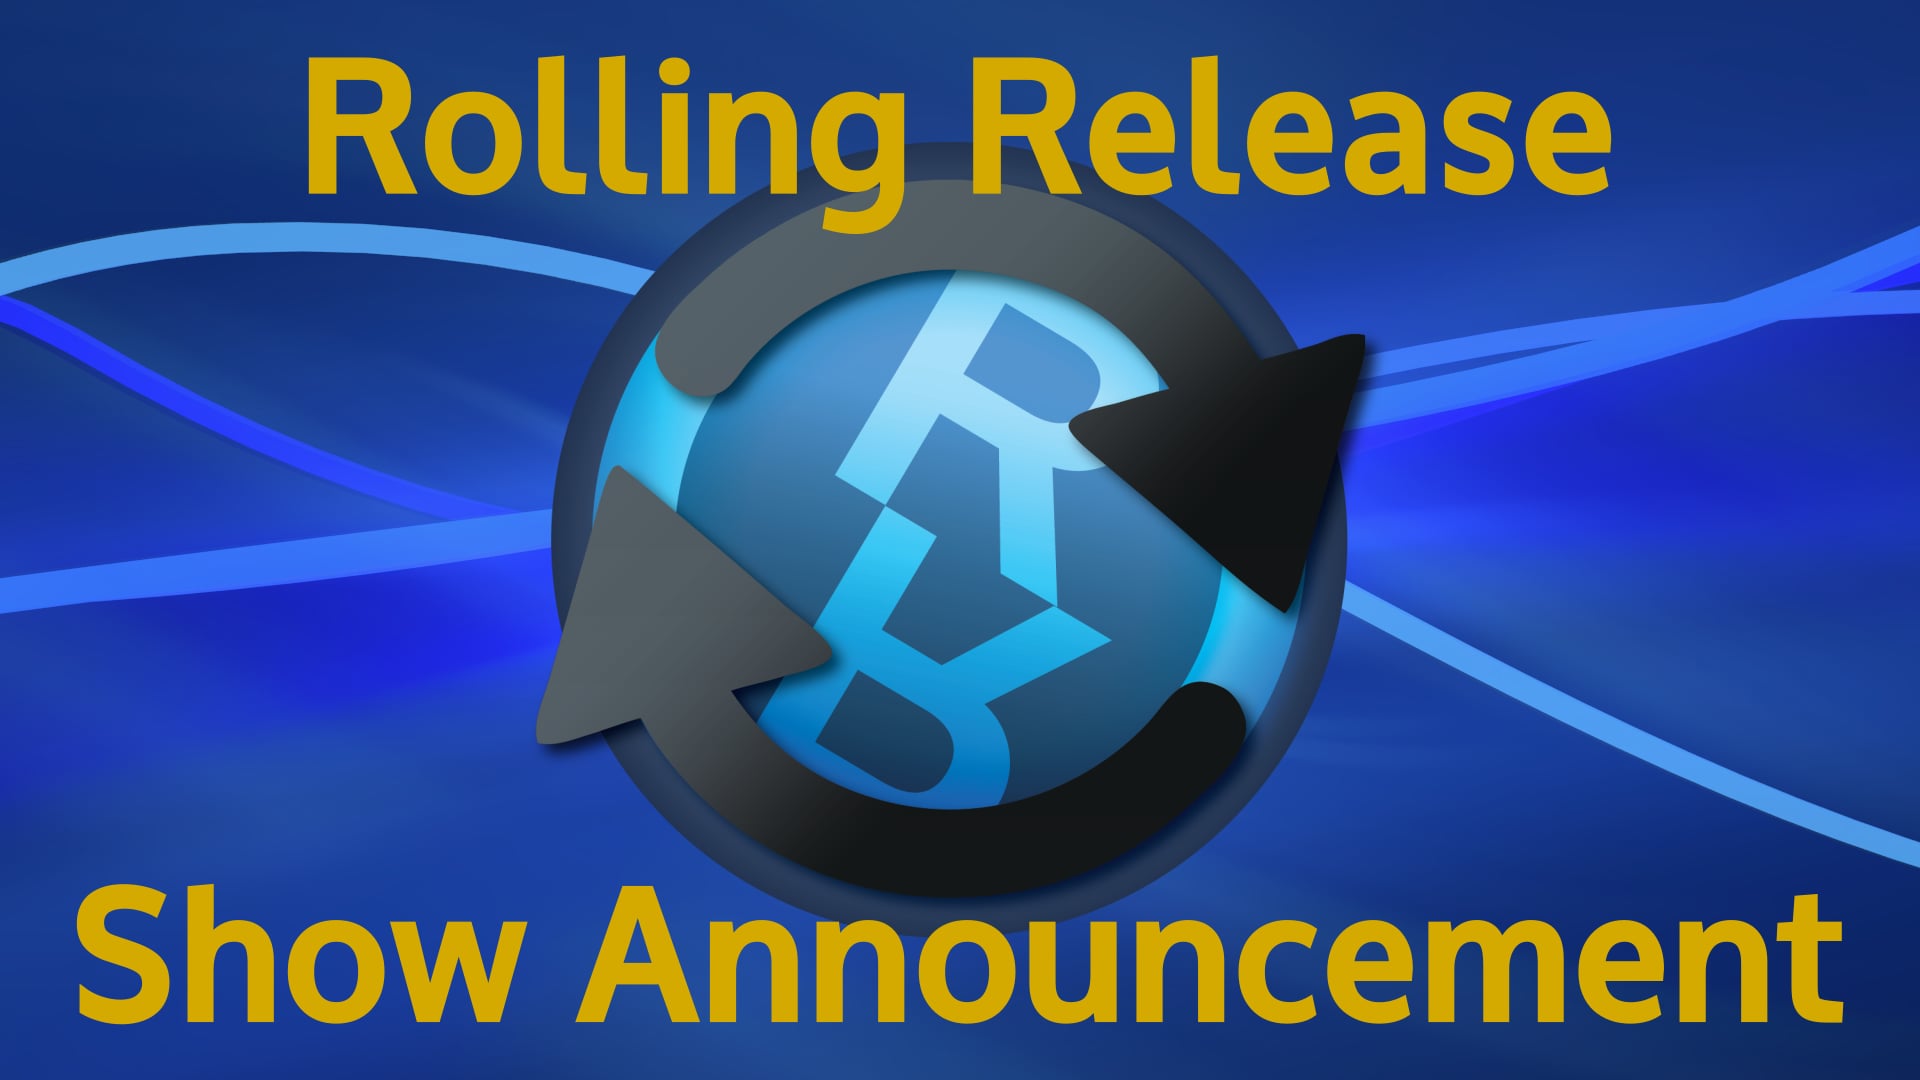 Rolling Release - New Show Announcement